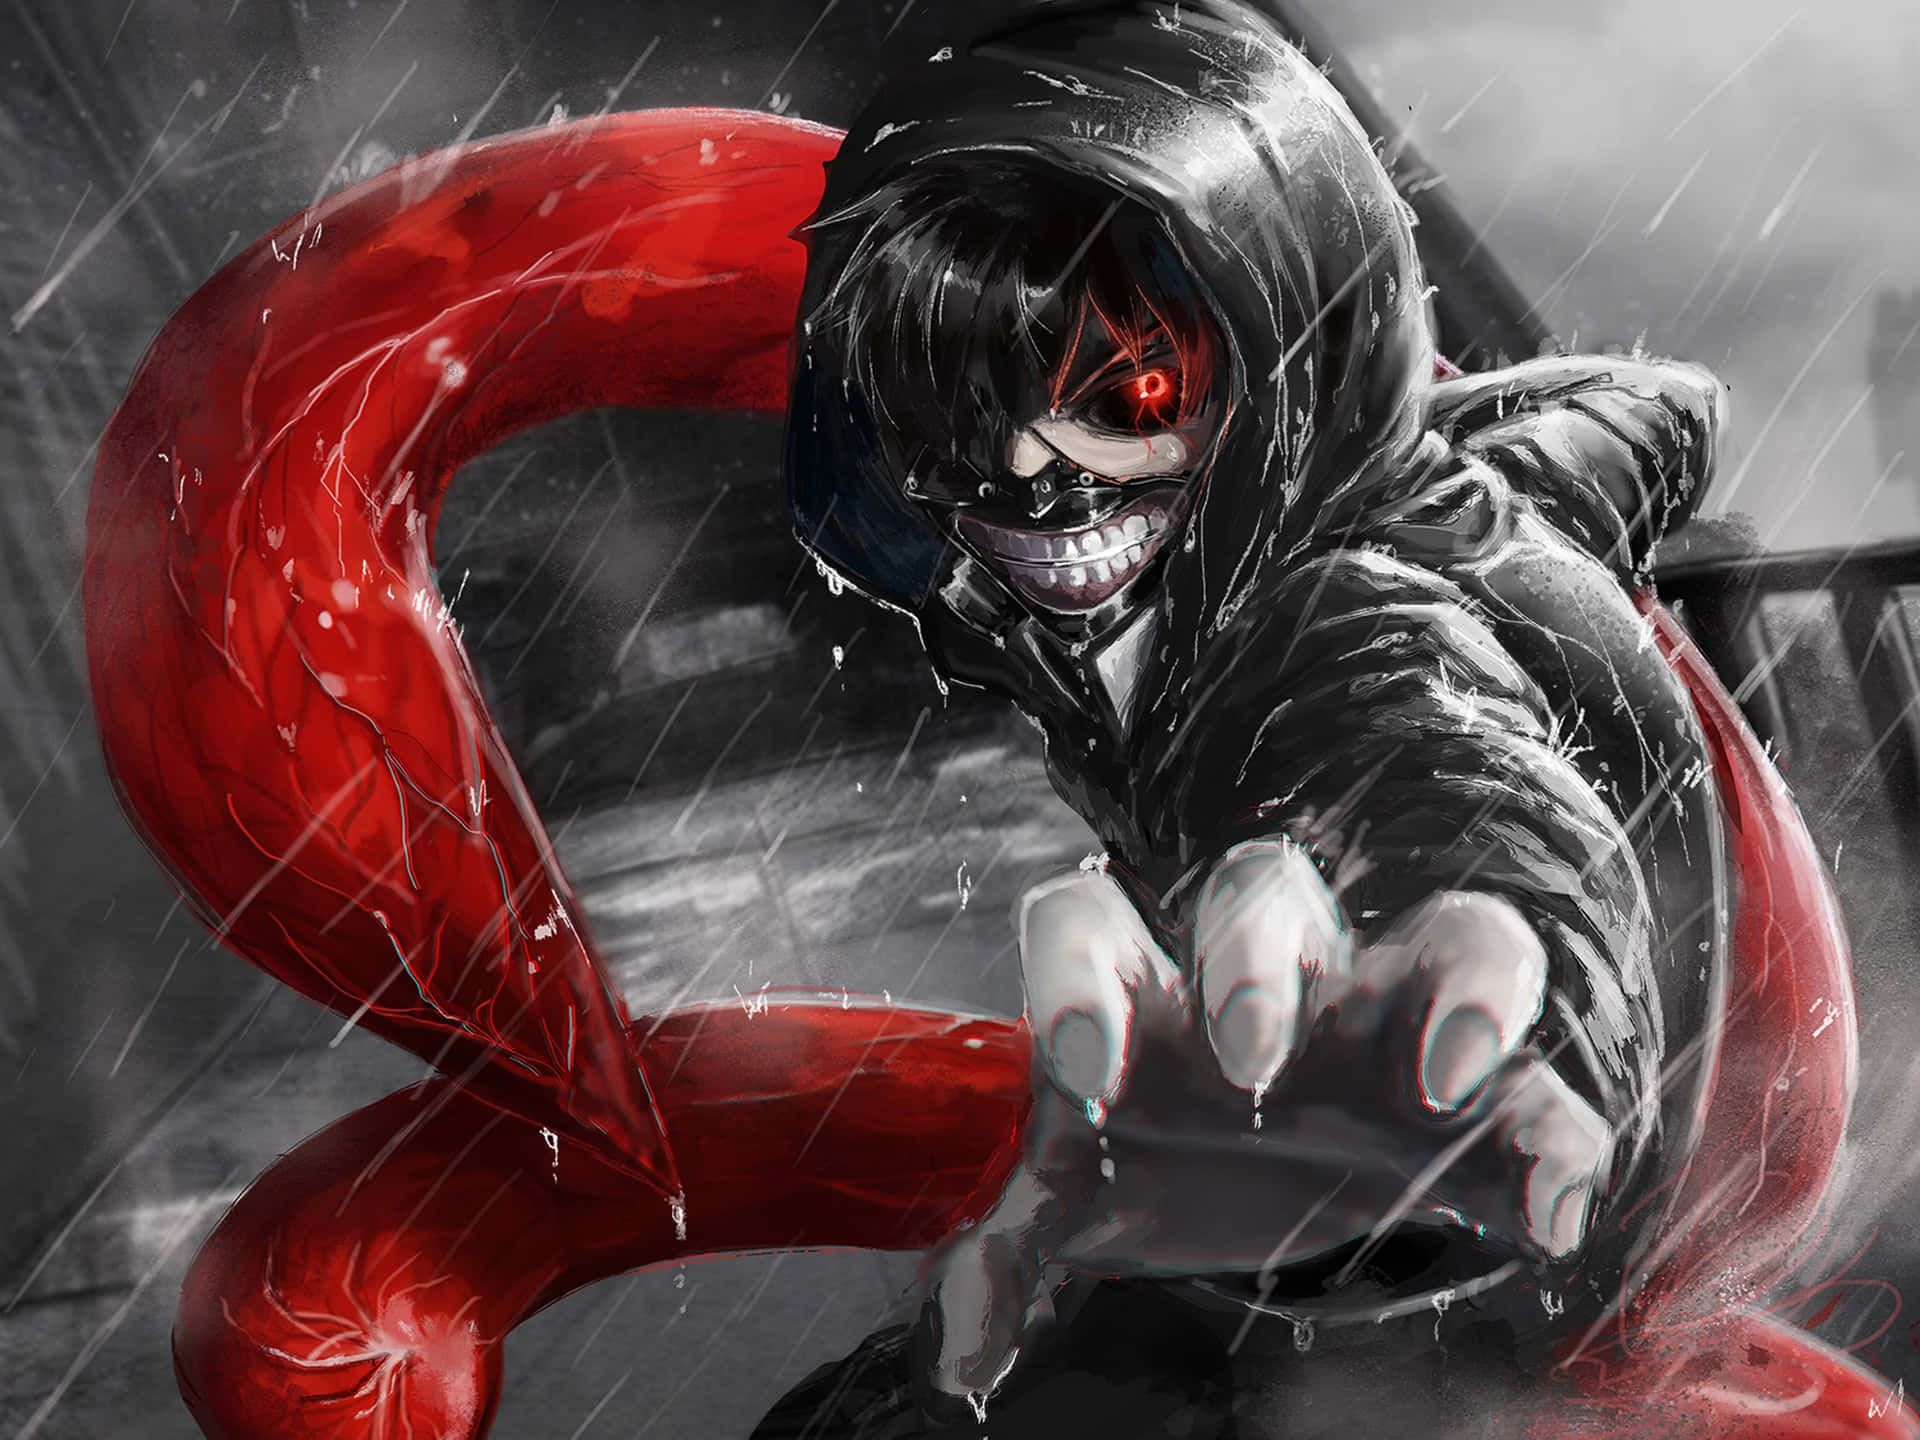 Experience The Surreal World Of Tokyo Ghoul On Your Desktop Wallpaper